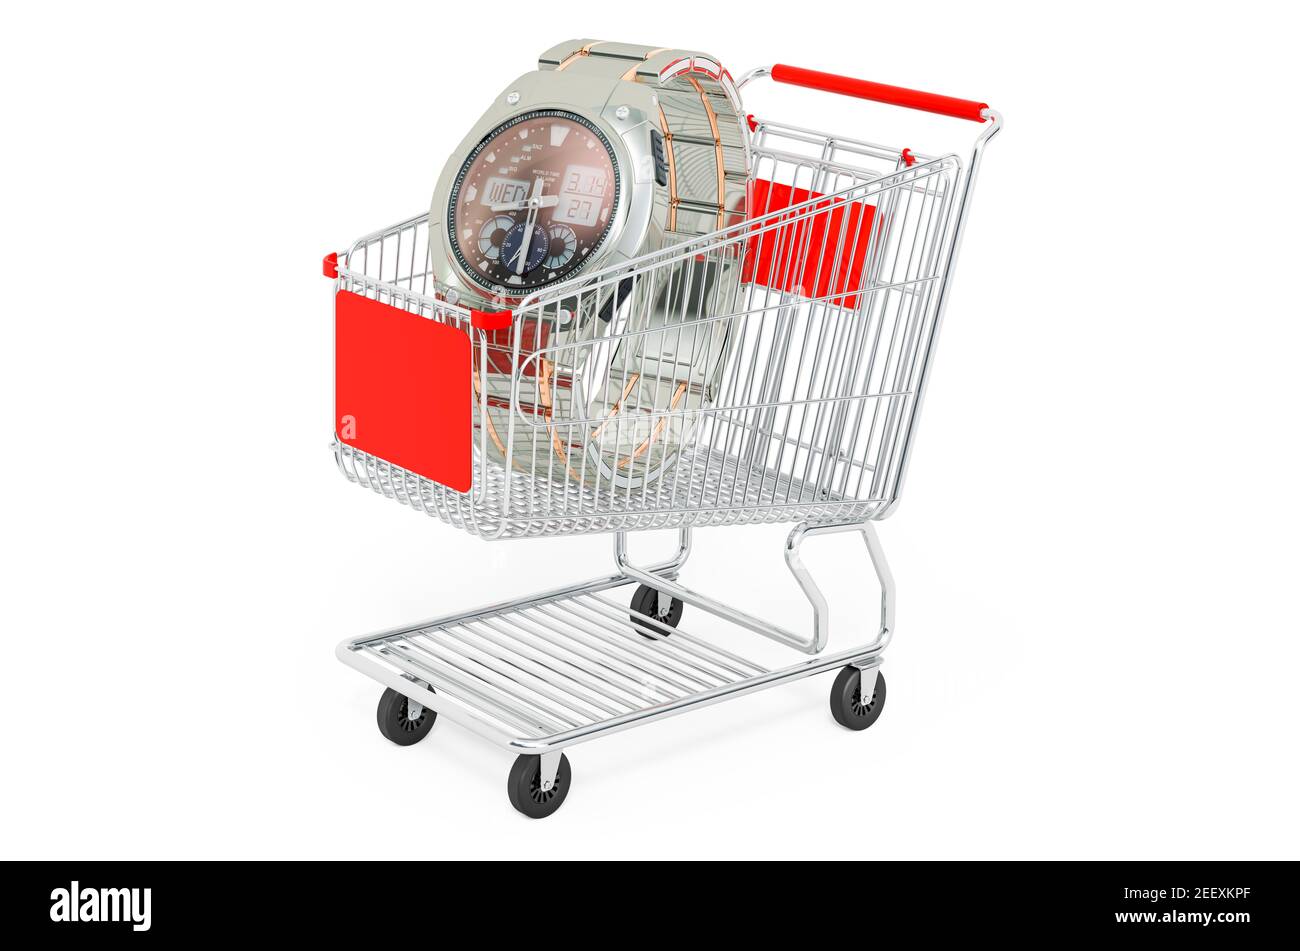 Shopping cart with analog digital watch. 3D rendering isolated on white background Stock Photo